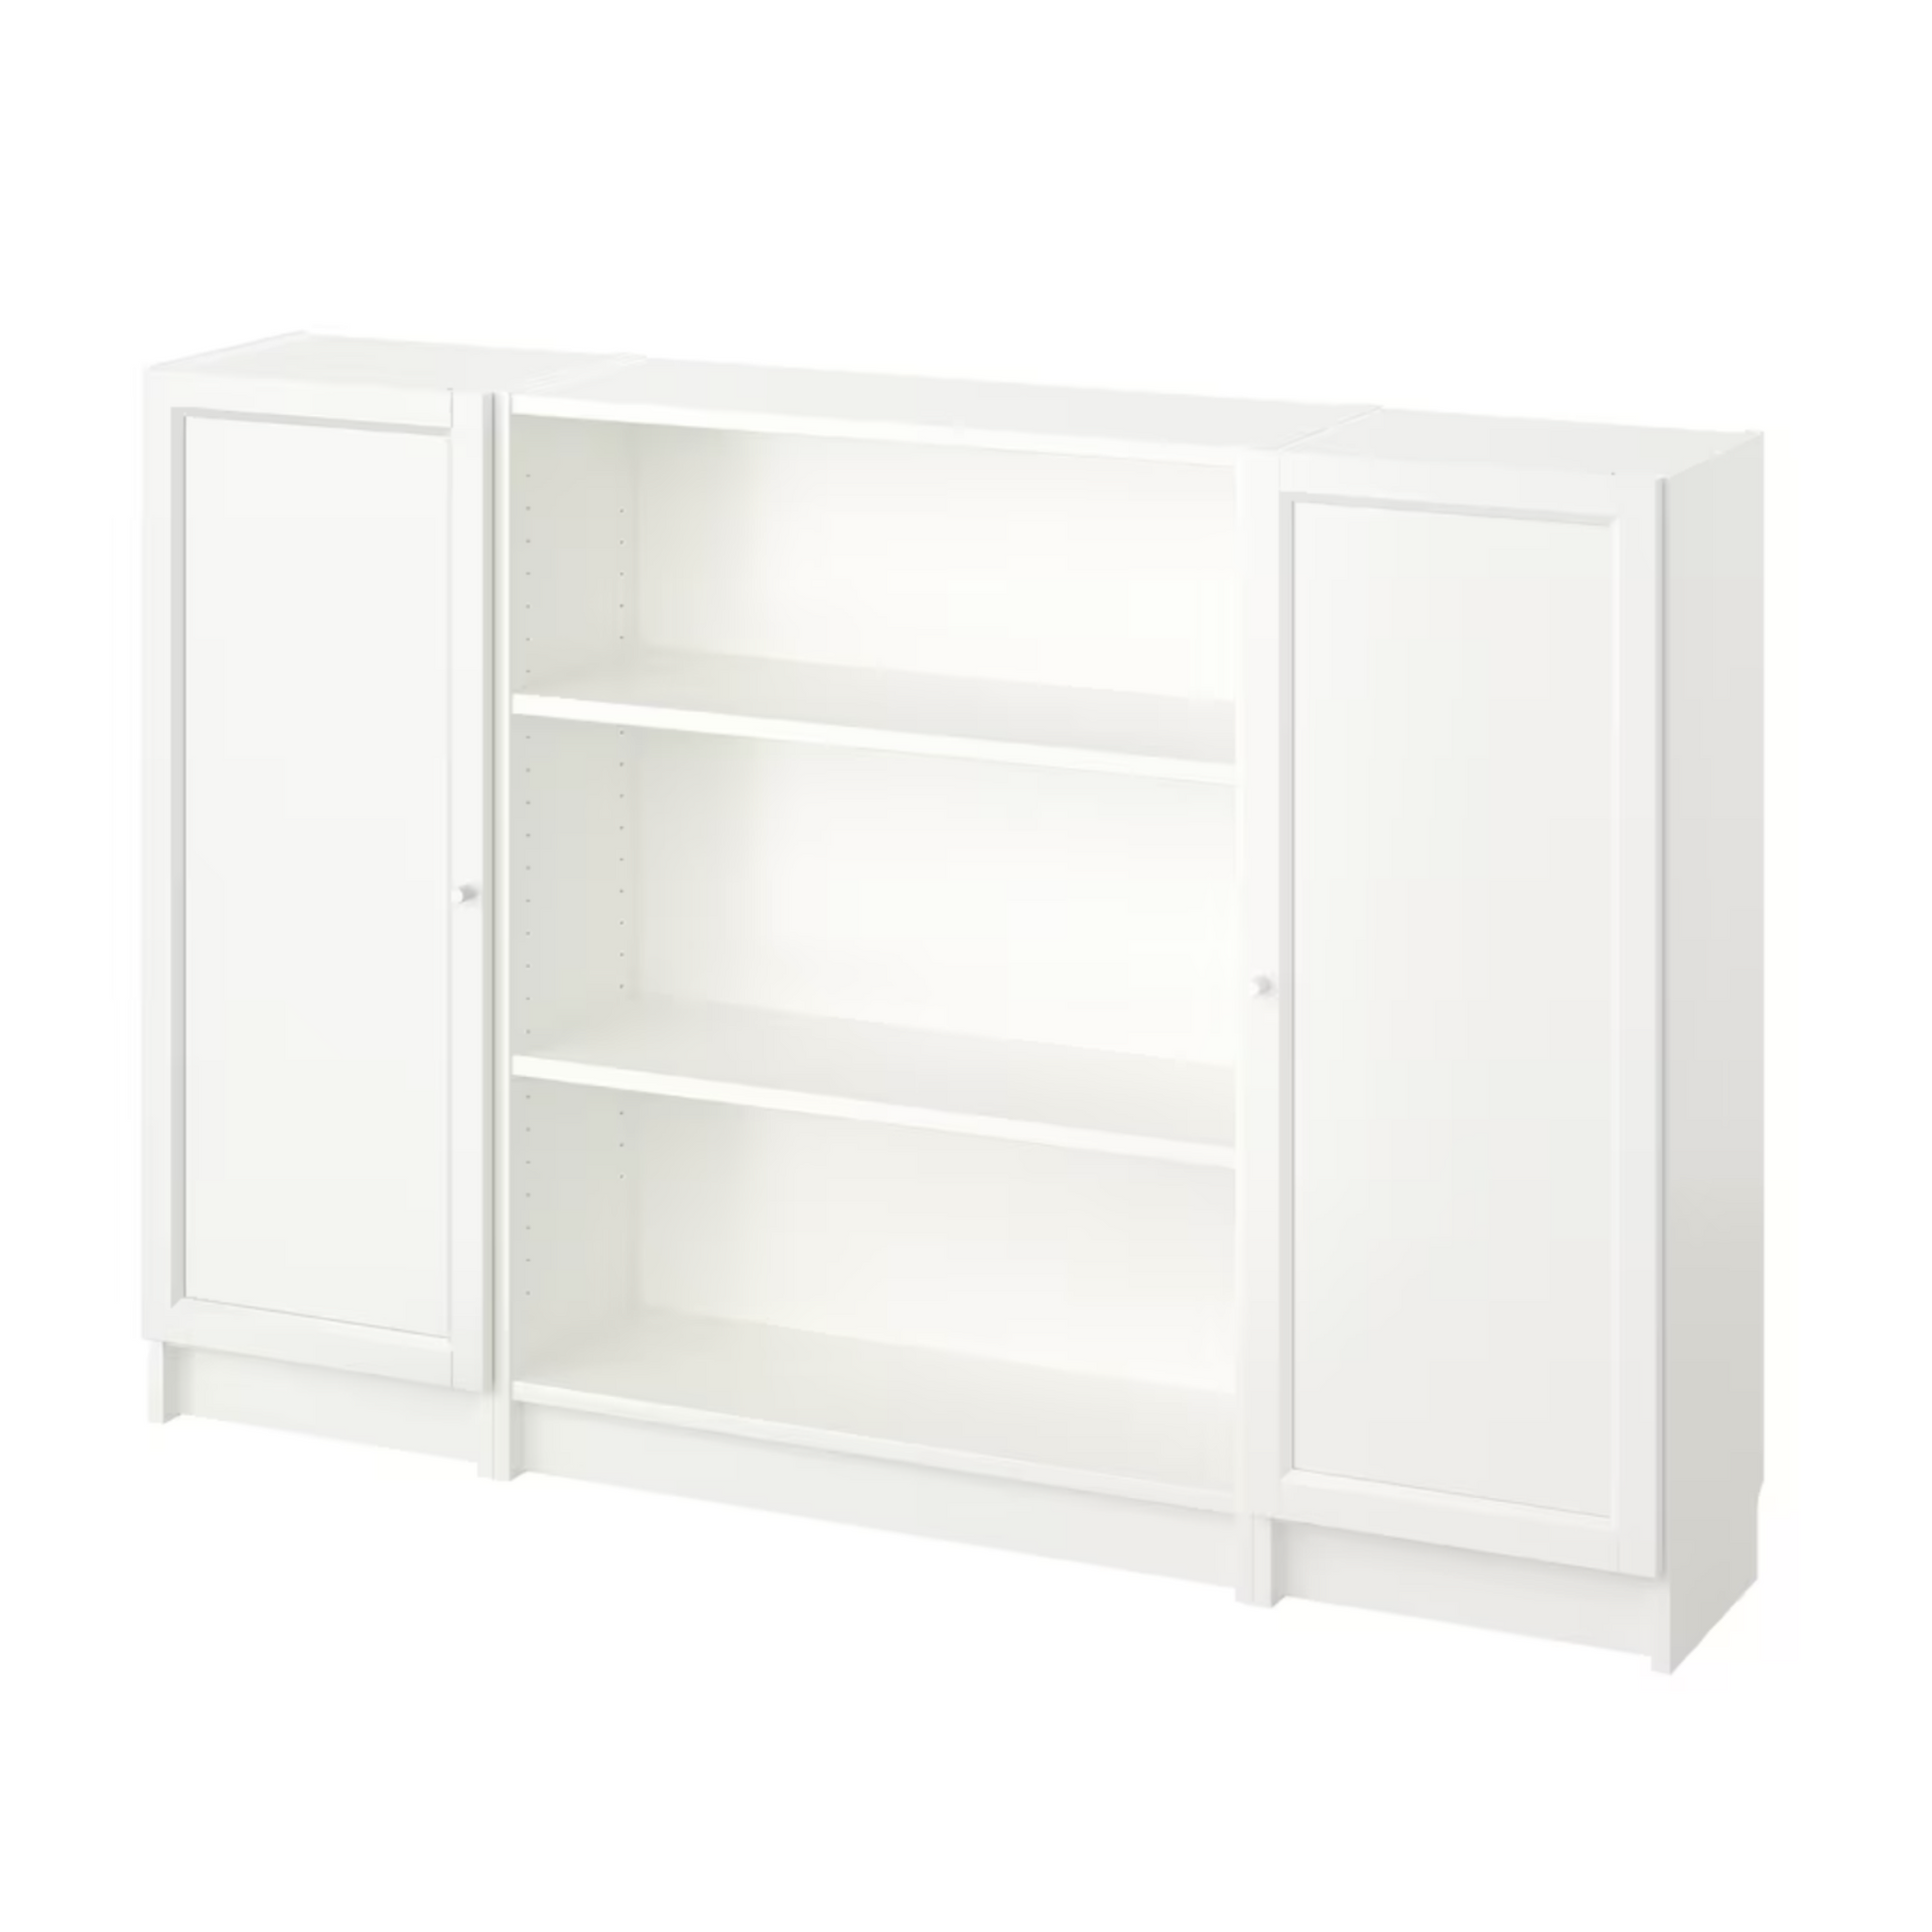 Ikea Billy Bookcase with Oxberg Solid Doors, 160x30x106cm, White (8129725661471)